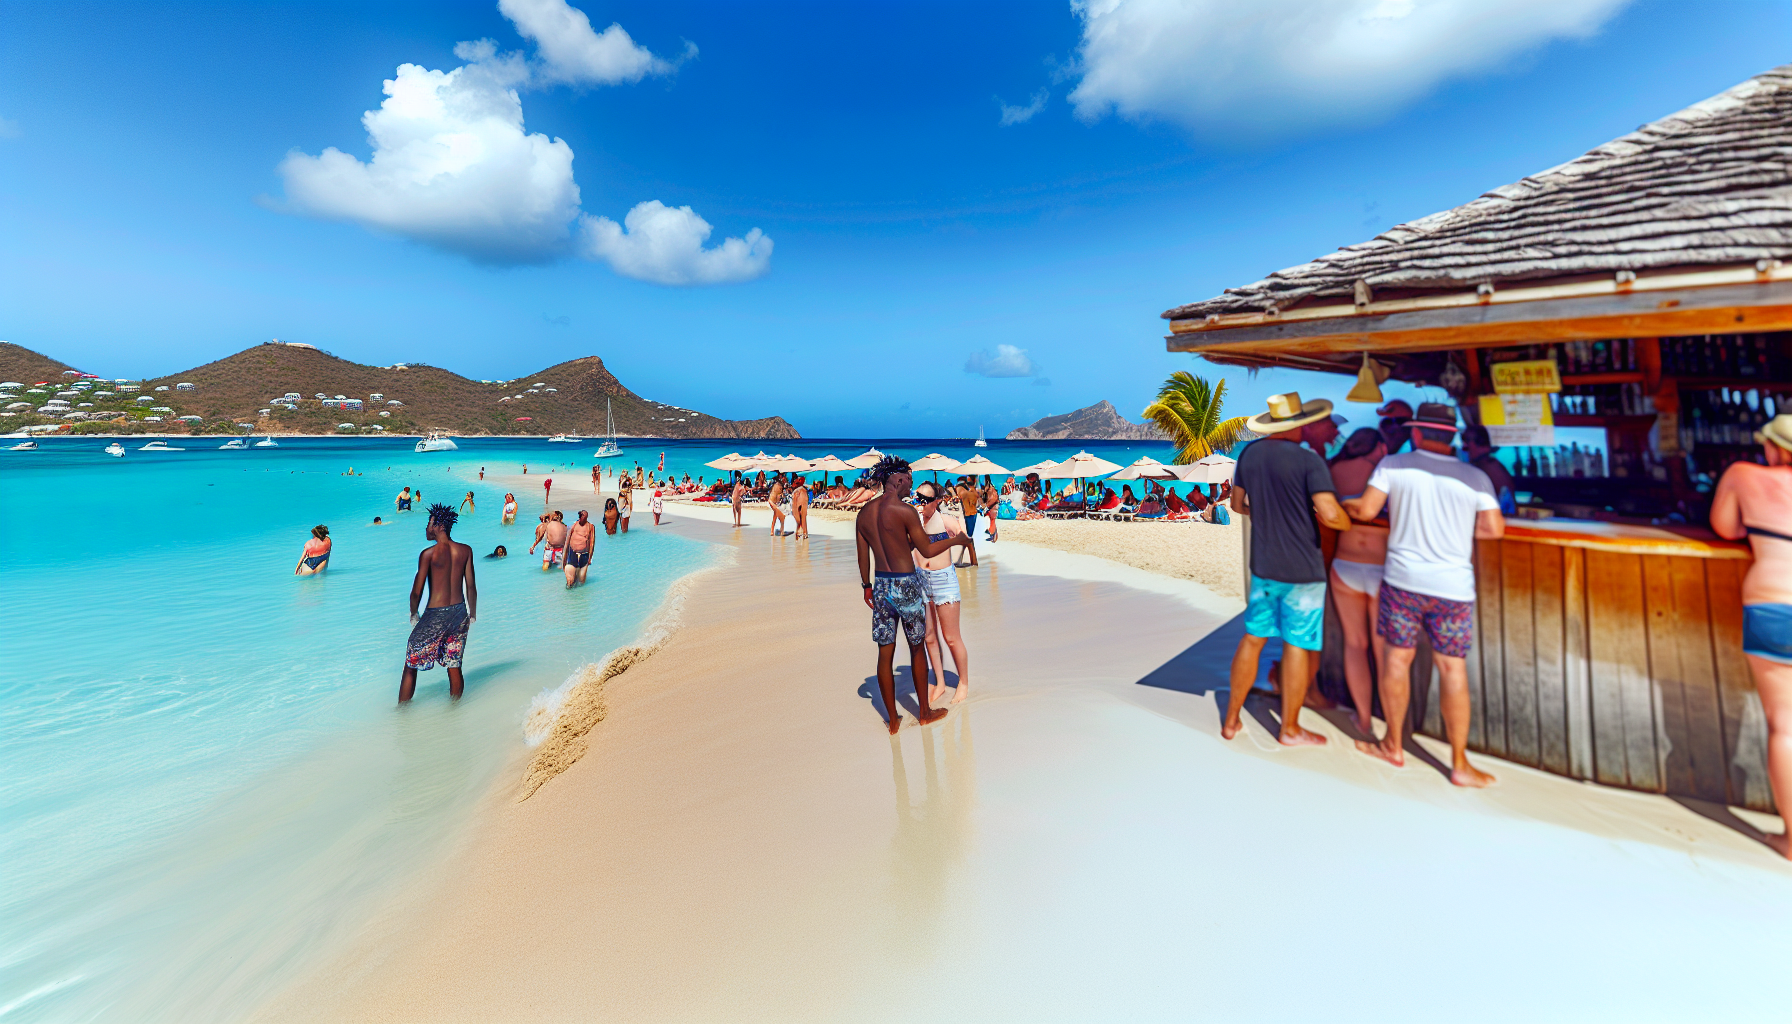 Rendezvous Bay with beach bars and views of St. Martin